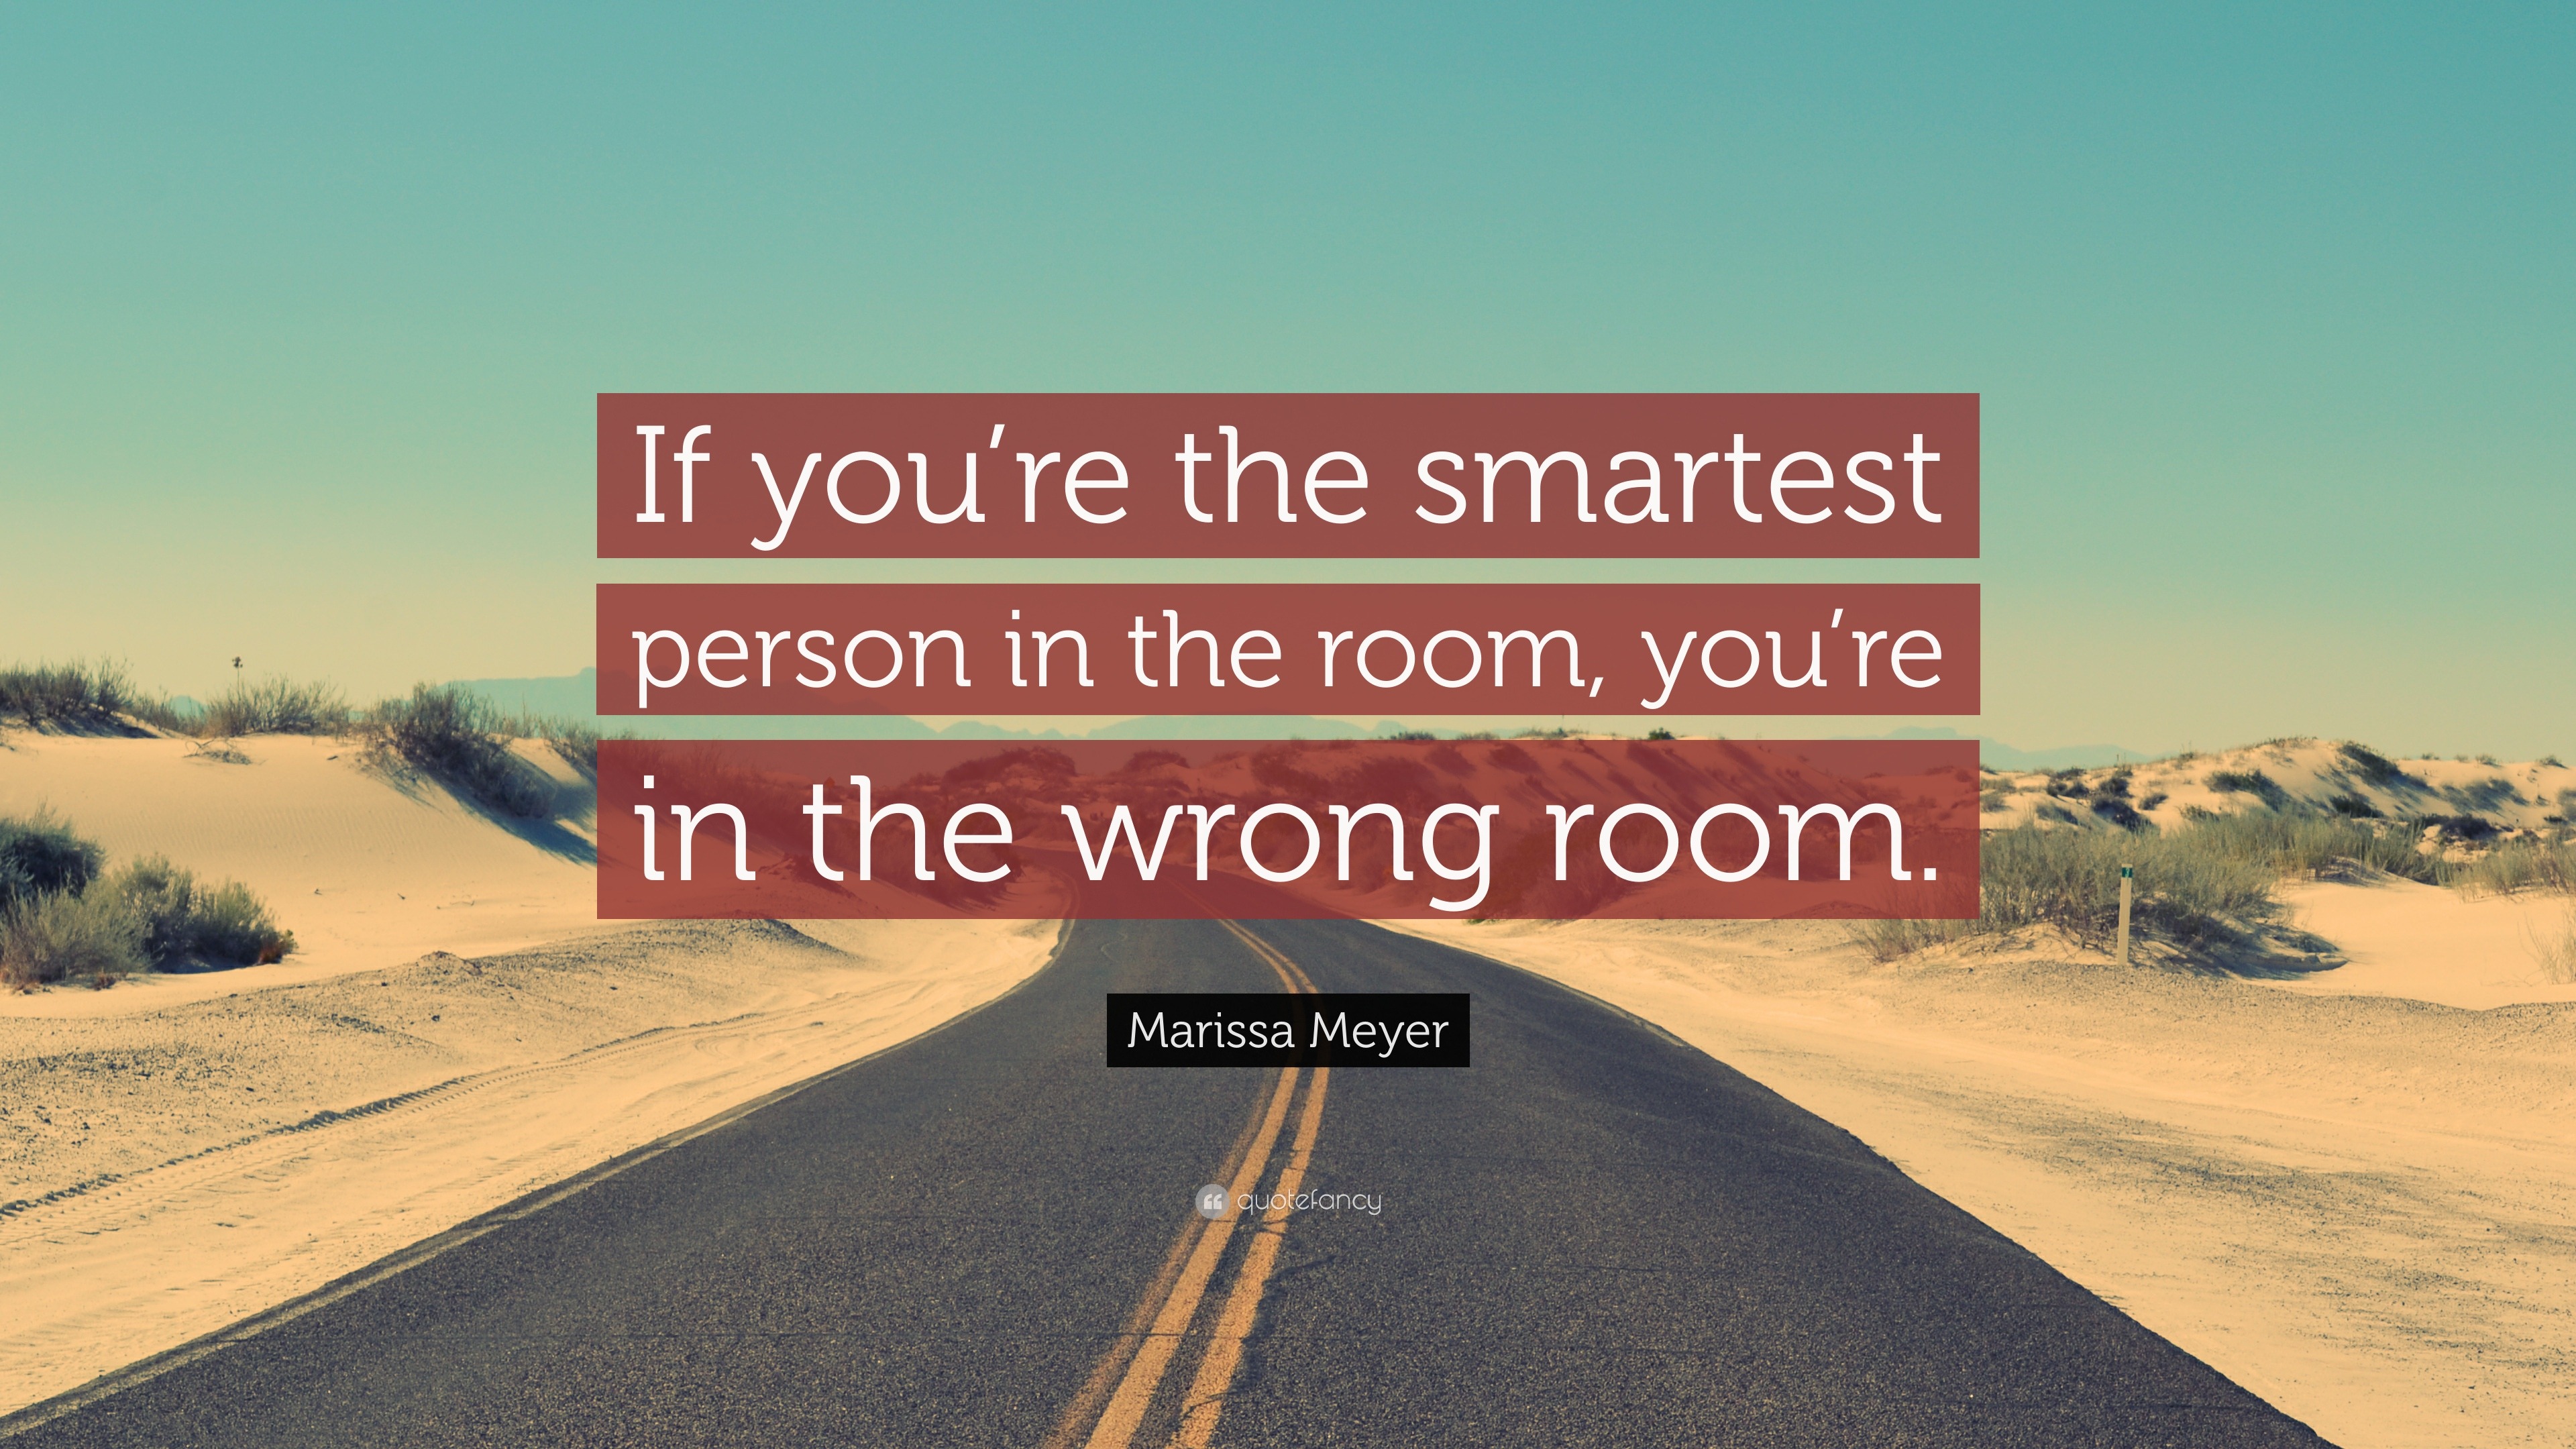 the smartest guys in the room book